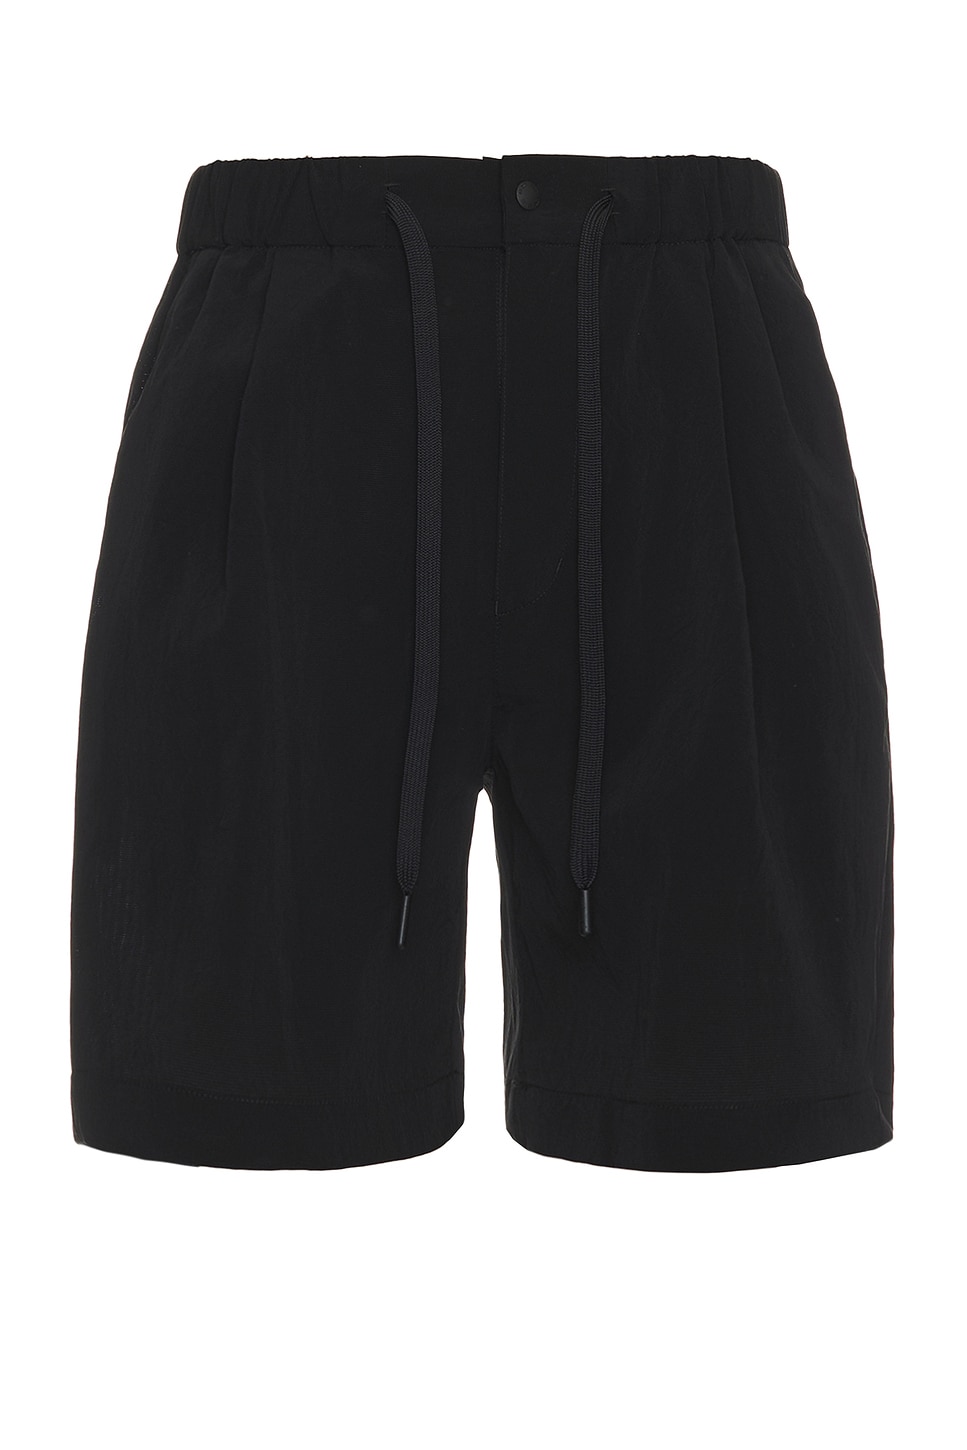 Image 1 of Snow Peak Breathable Quick Dry Shorts in Black